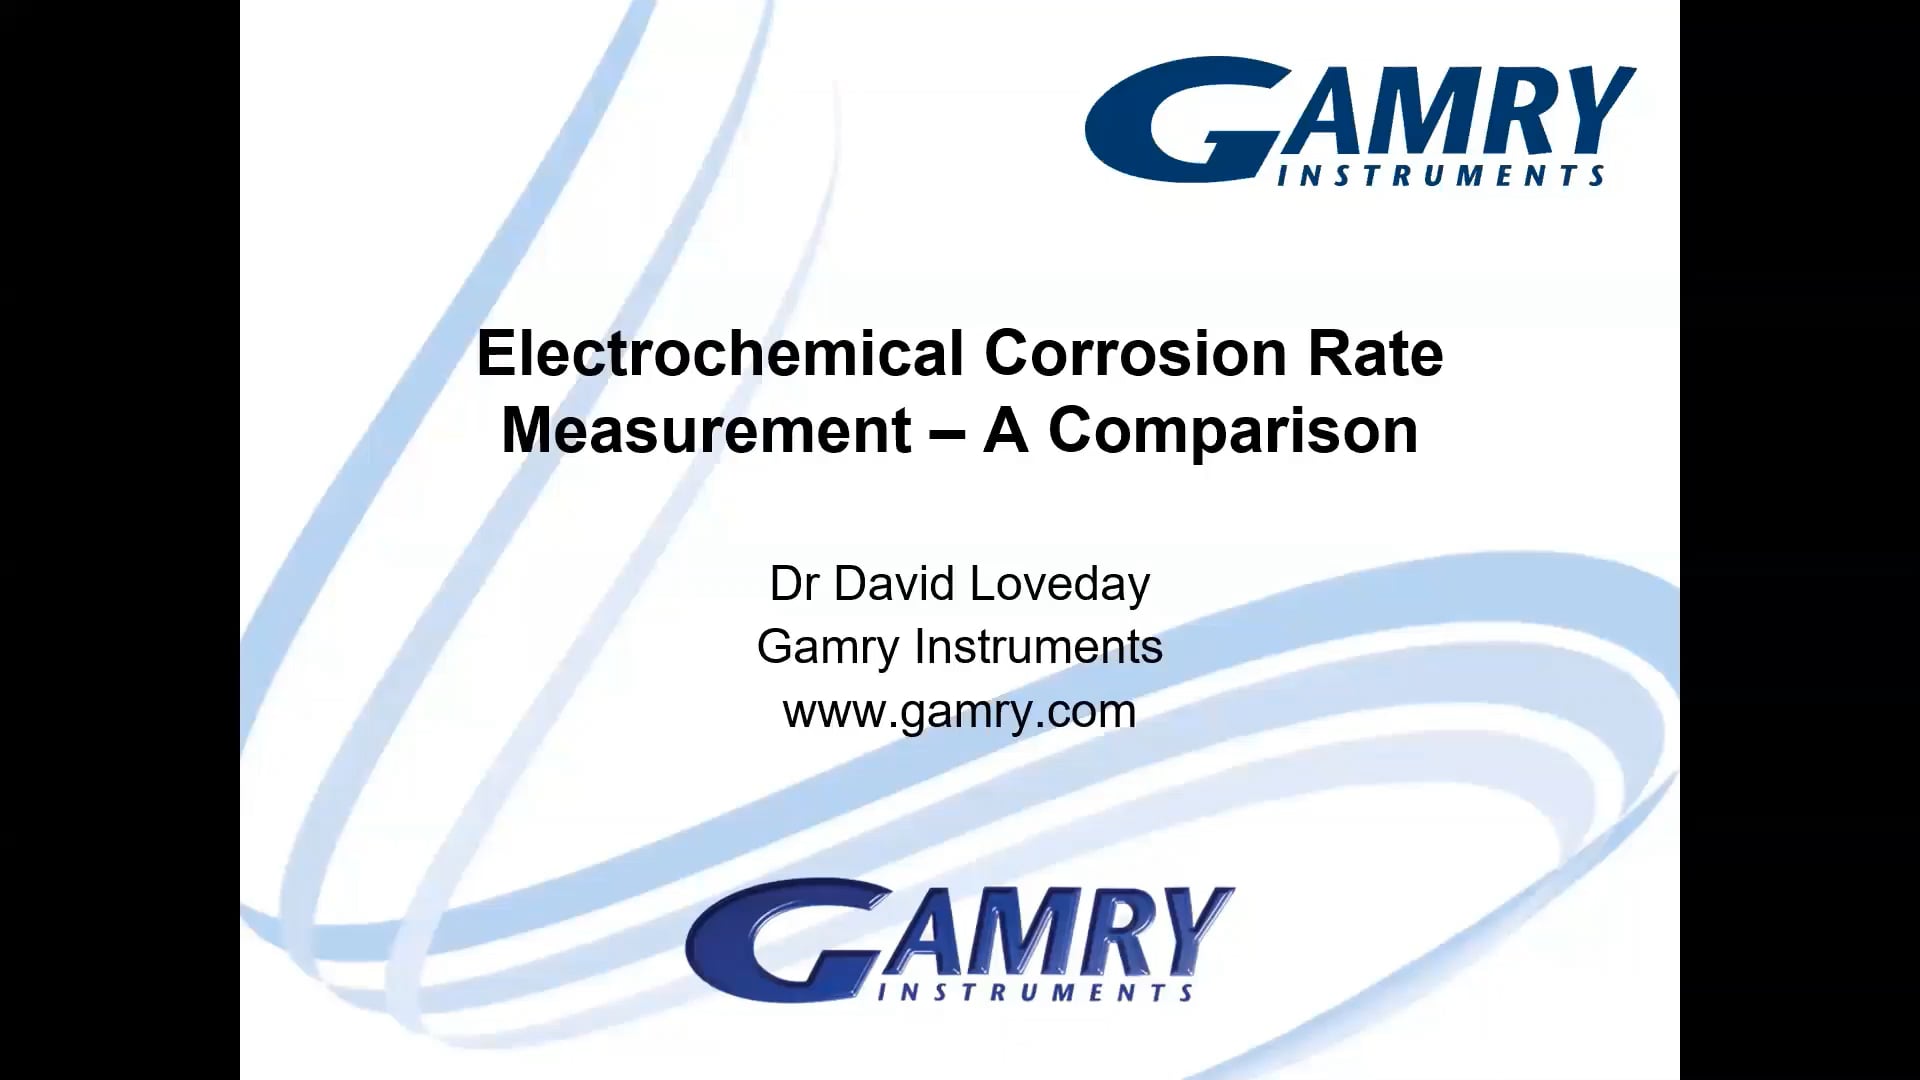 Electrochemical Corrosion Rate Measurement